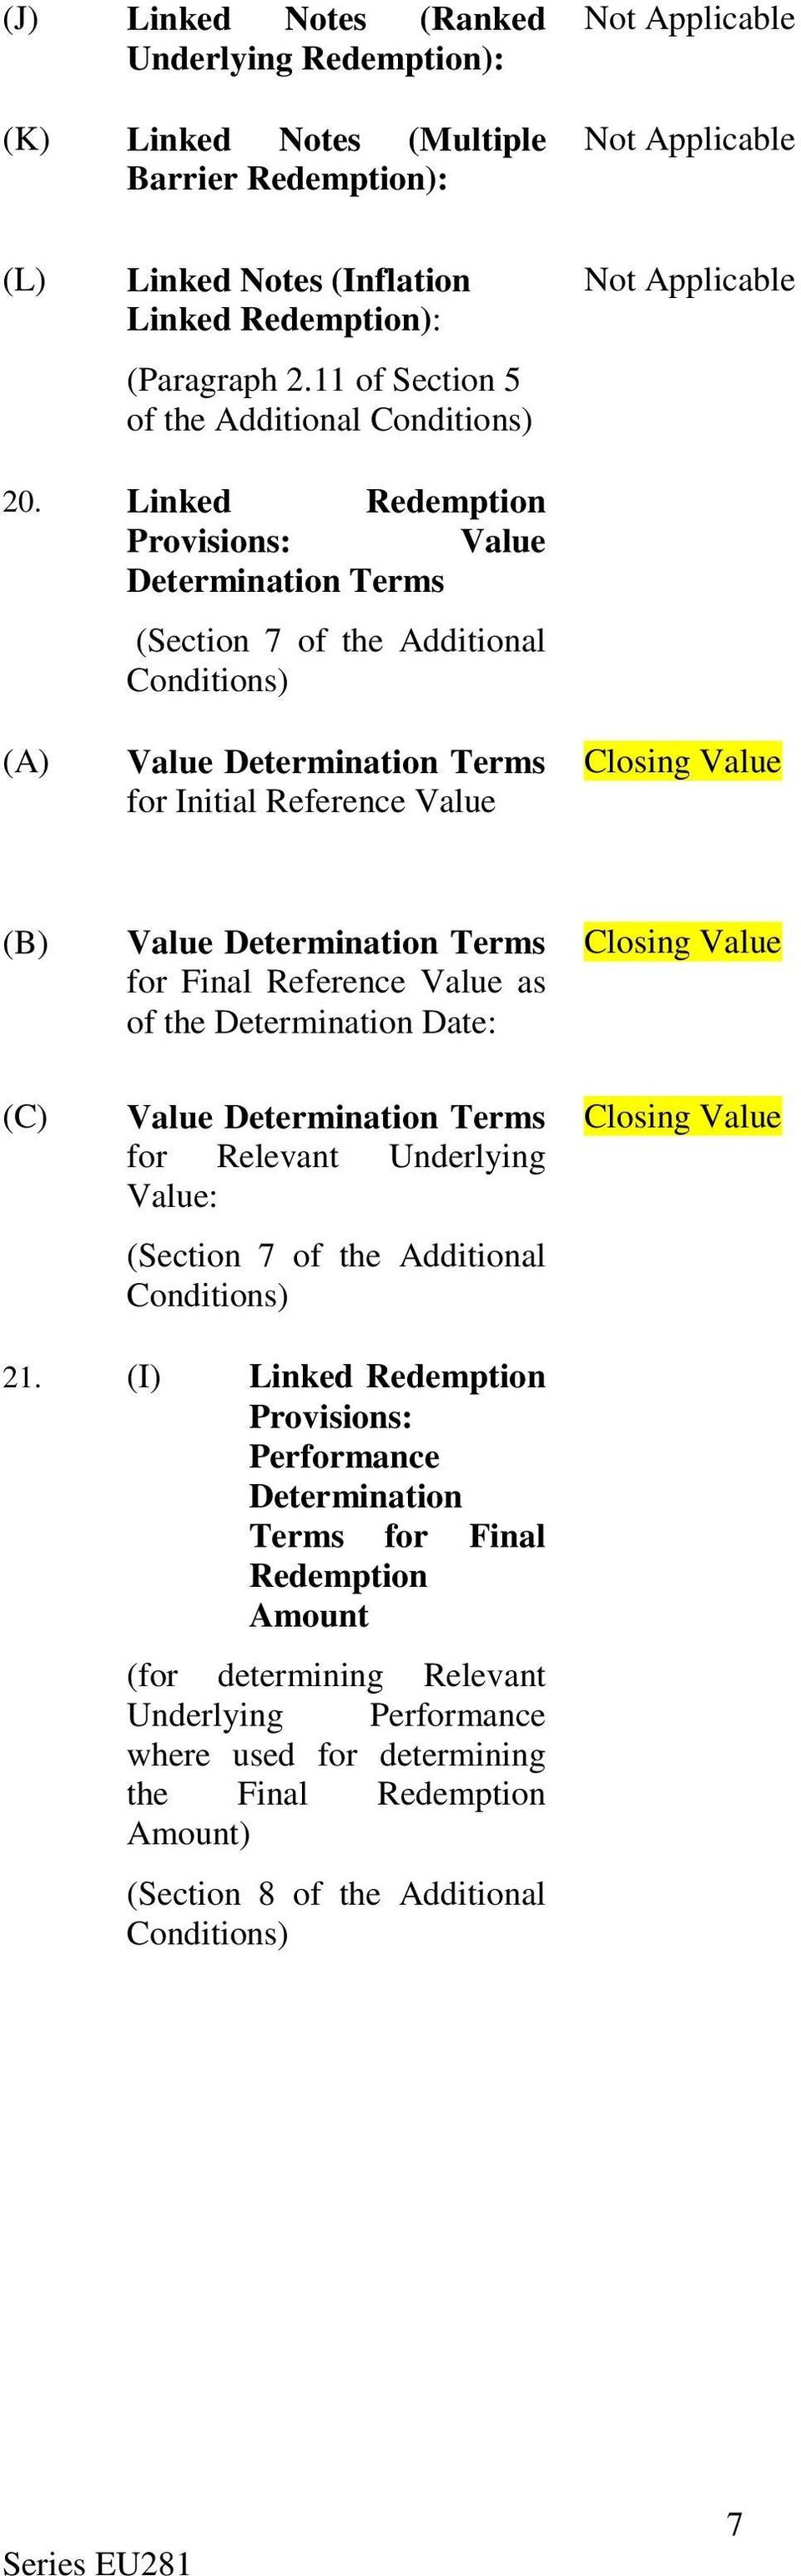 Linked Redemption Provisions: Value Determination Terms (Section 7 of the Additional Conditions) (A) Value Determination Terms for Initial Reference Value Closing Value (B) (C) Value Determination